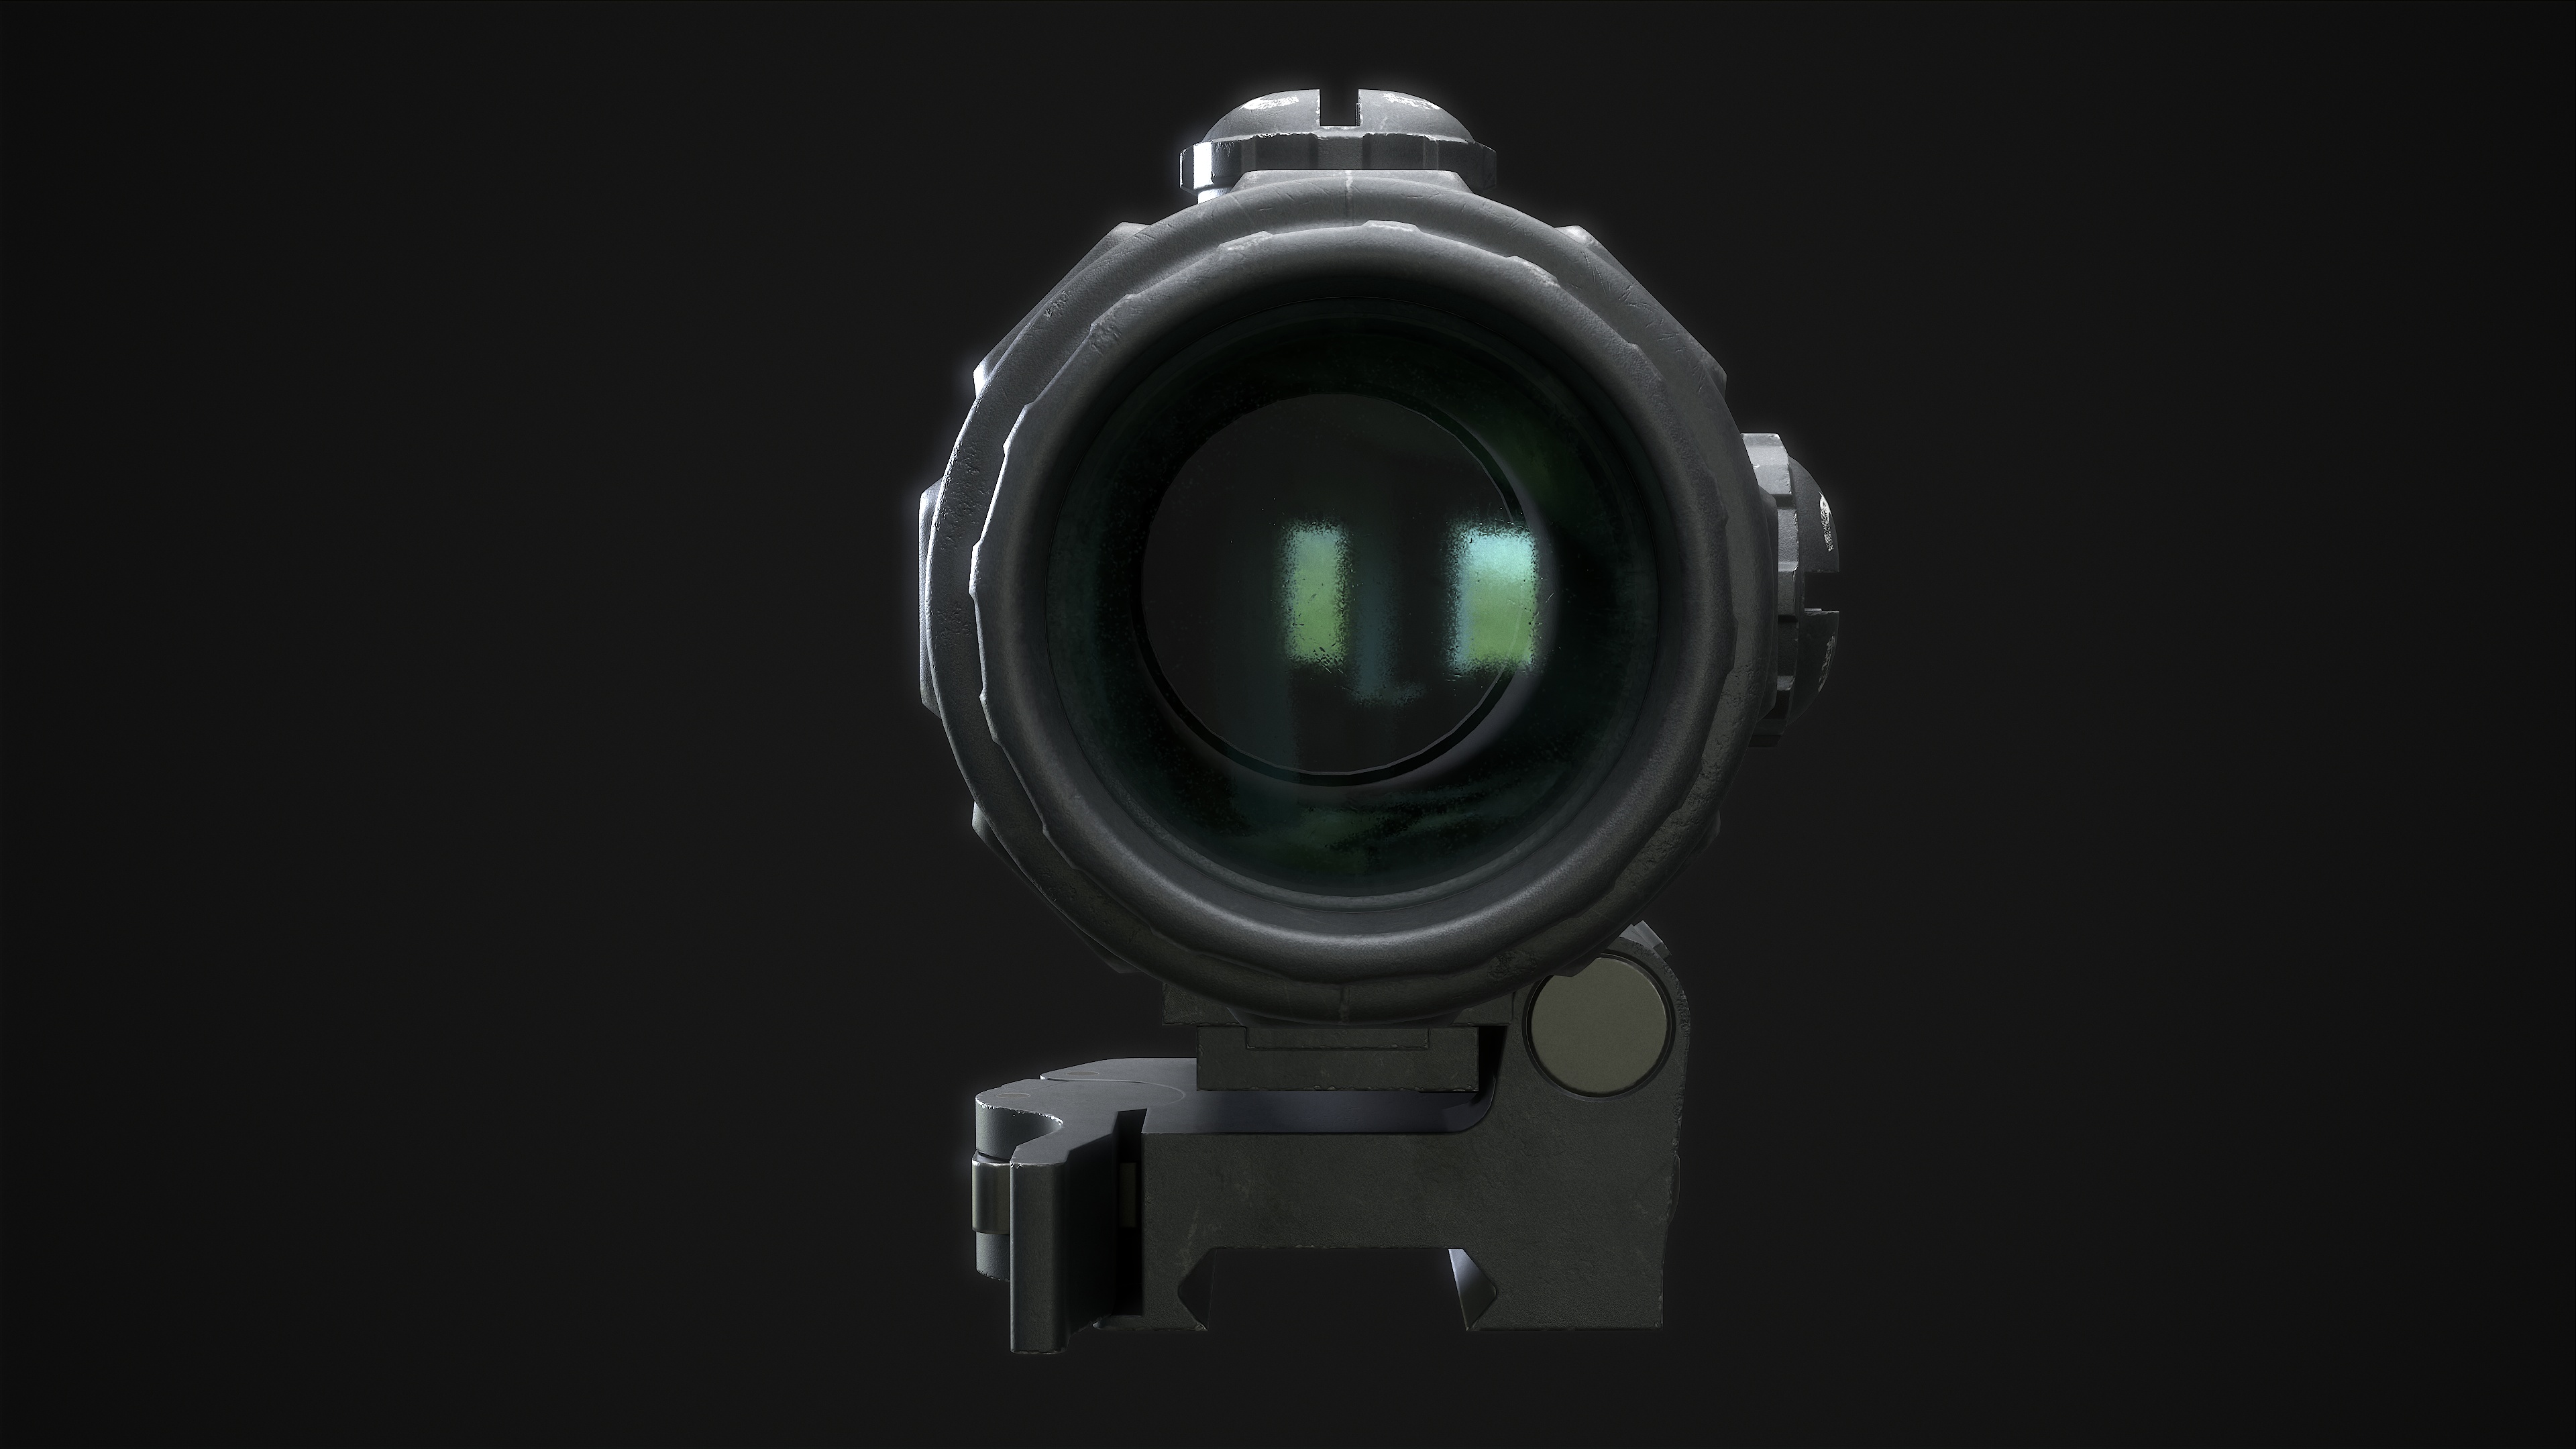 Holo EXPS-3 With Magnifier 3x